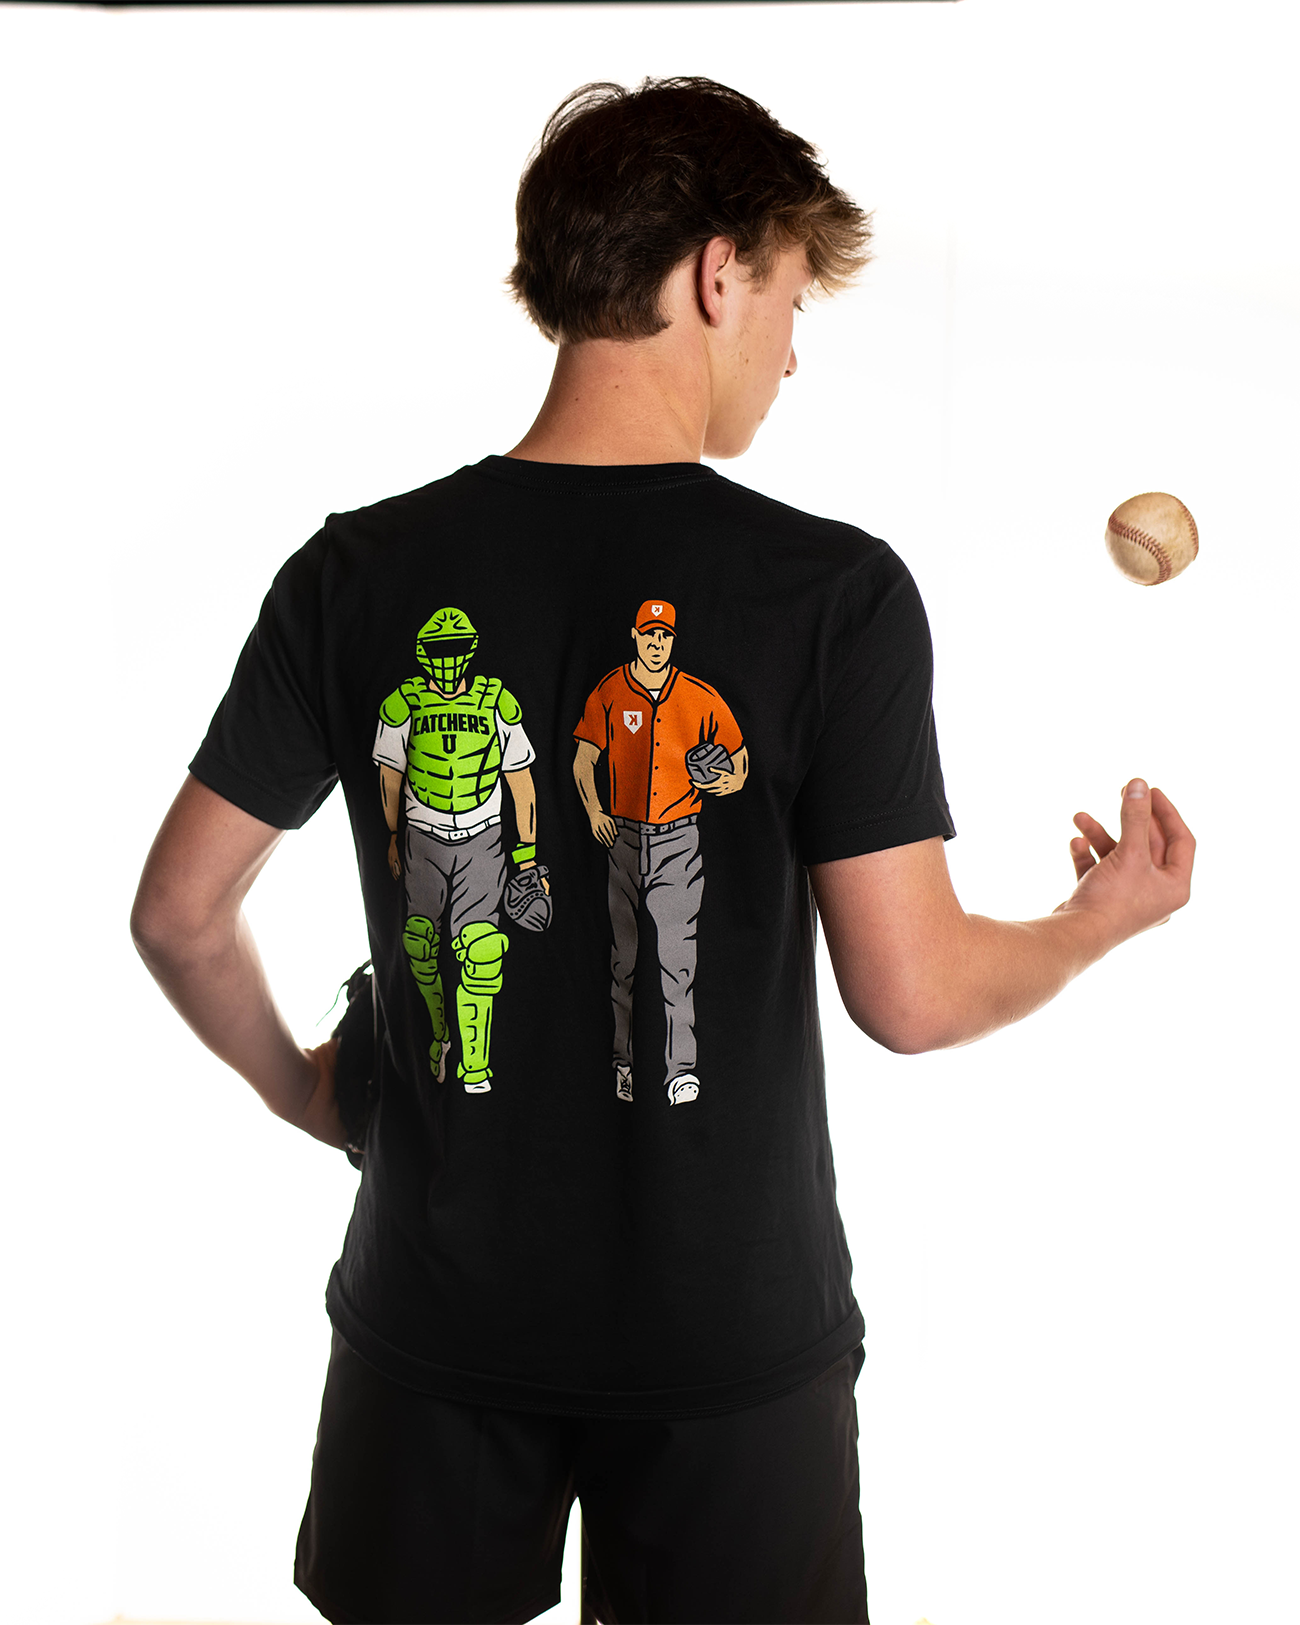 The Battery Adult Tee